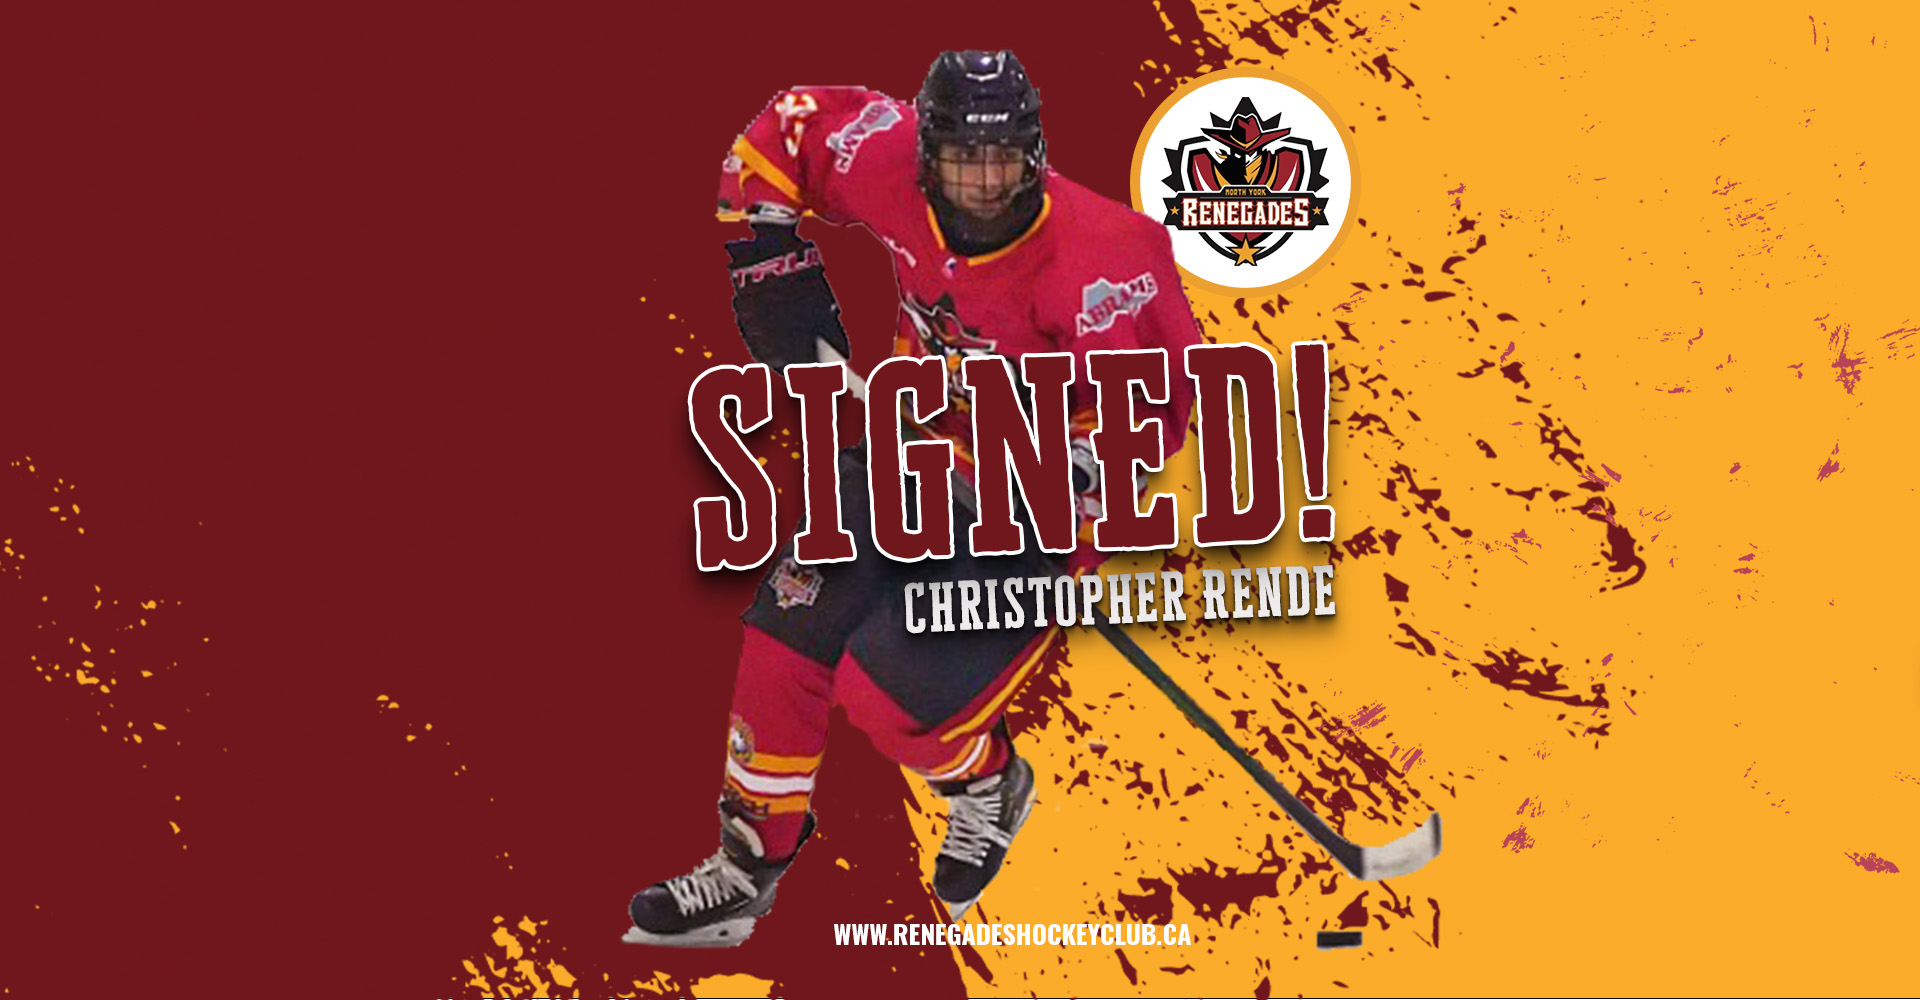 Christopher Rende signs with Renegades